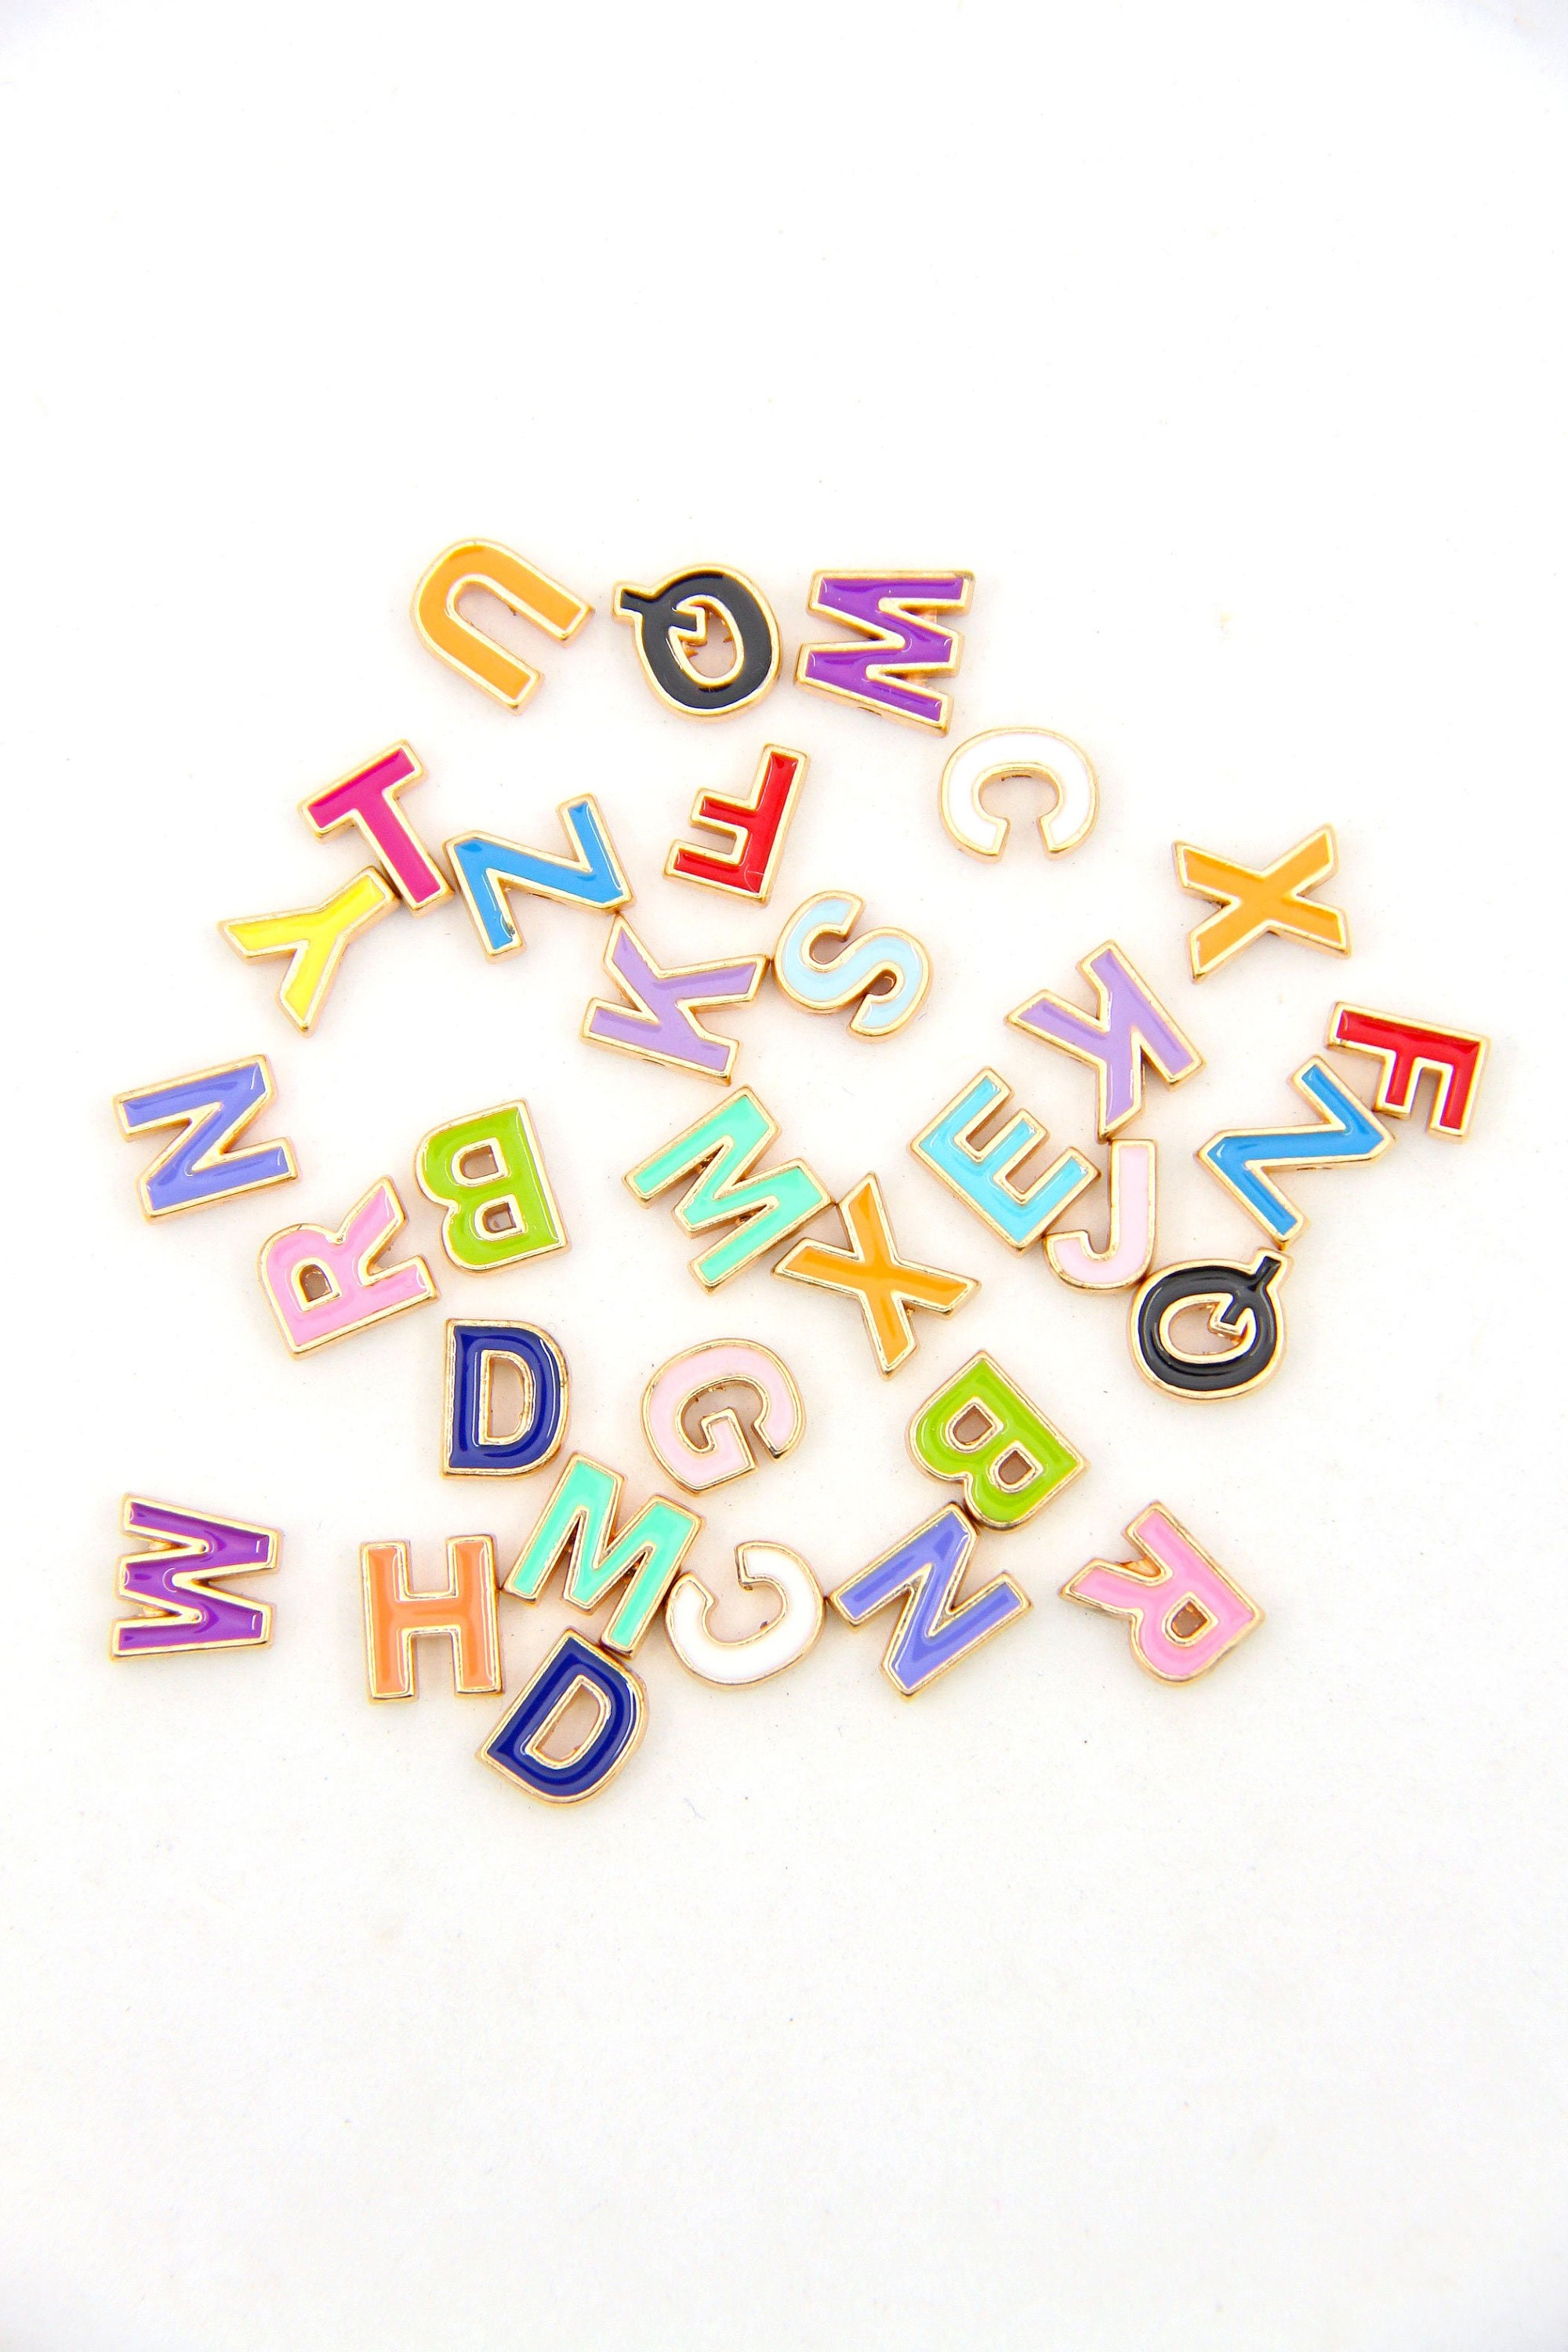 White and Gold Letter Beads-1pc, Gold Letter Beads Bulk, Gold